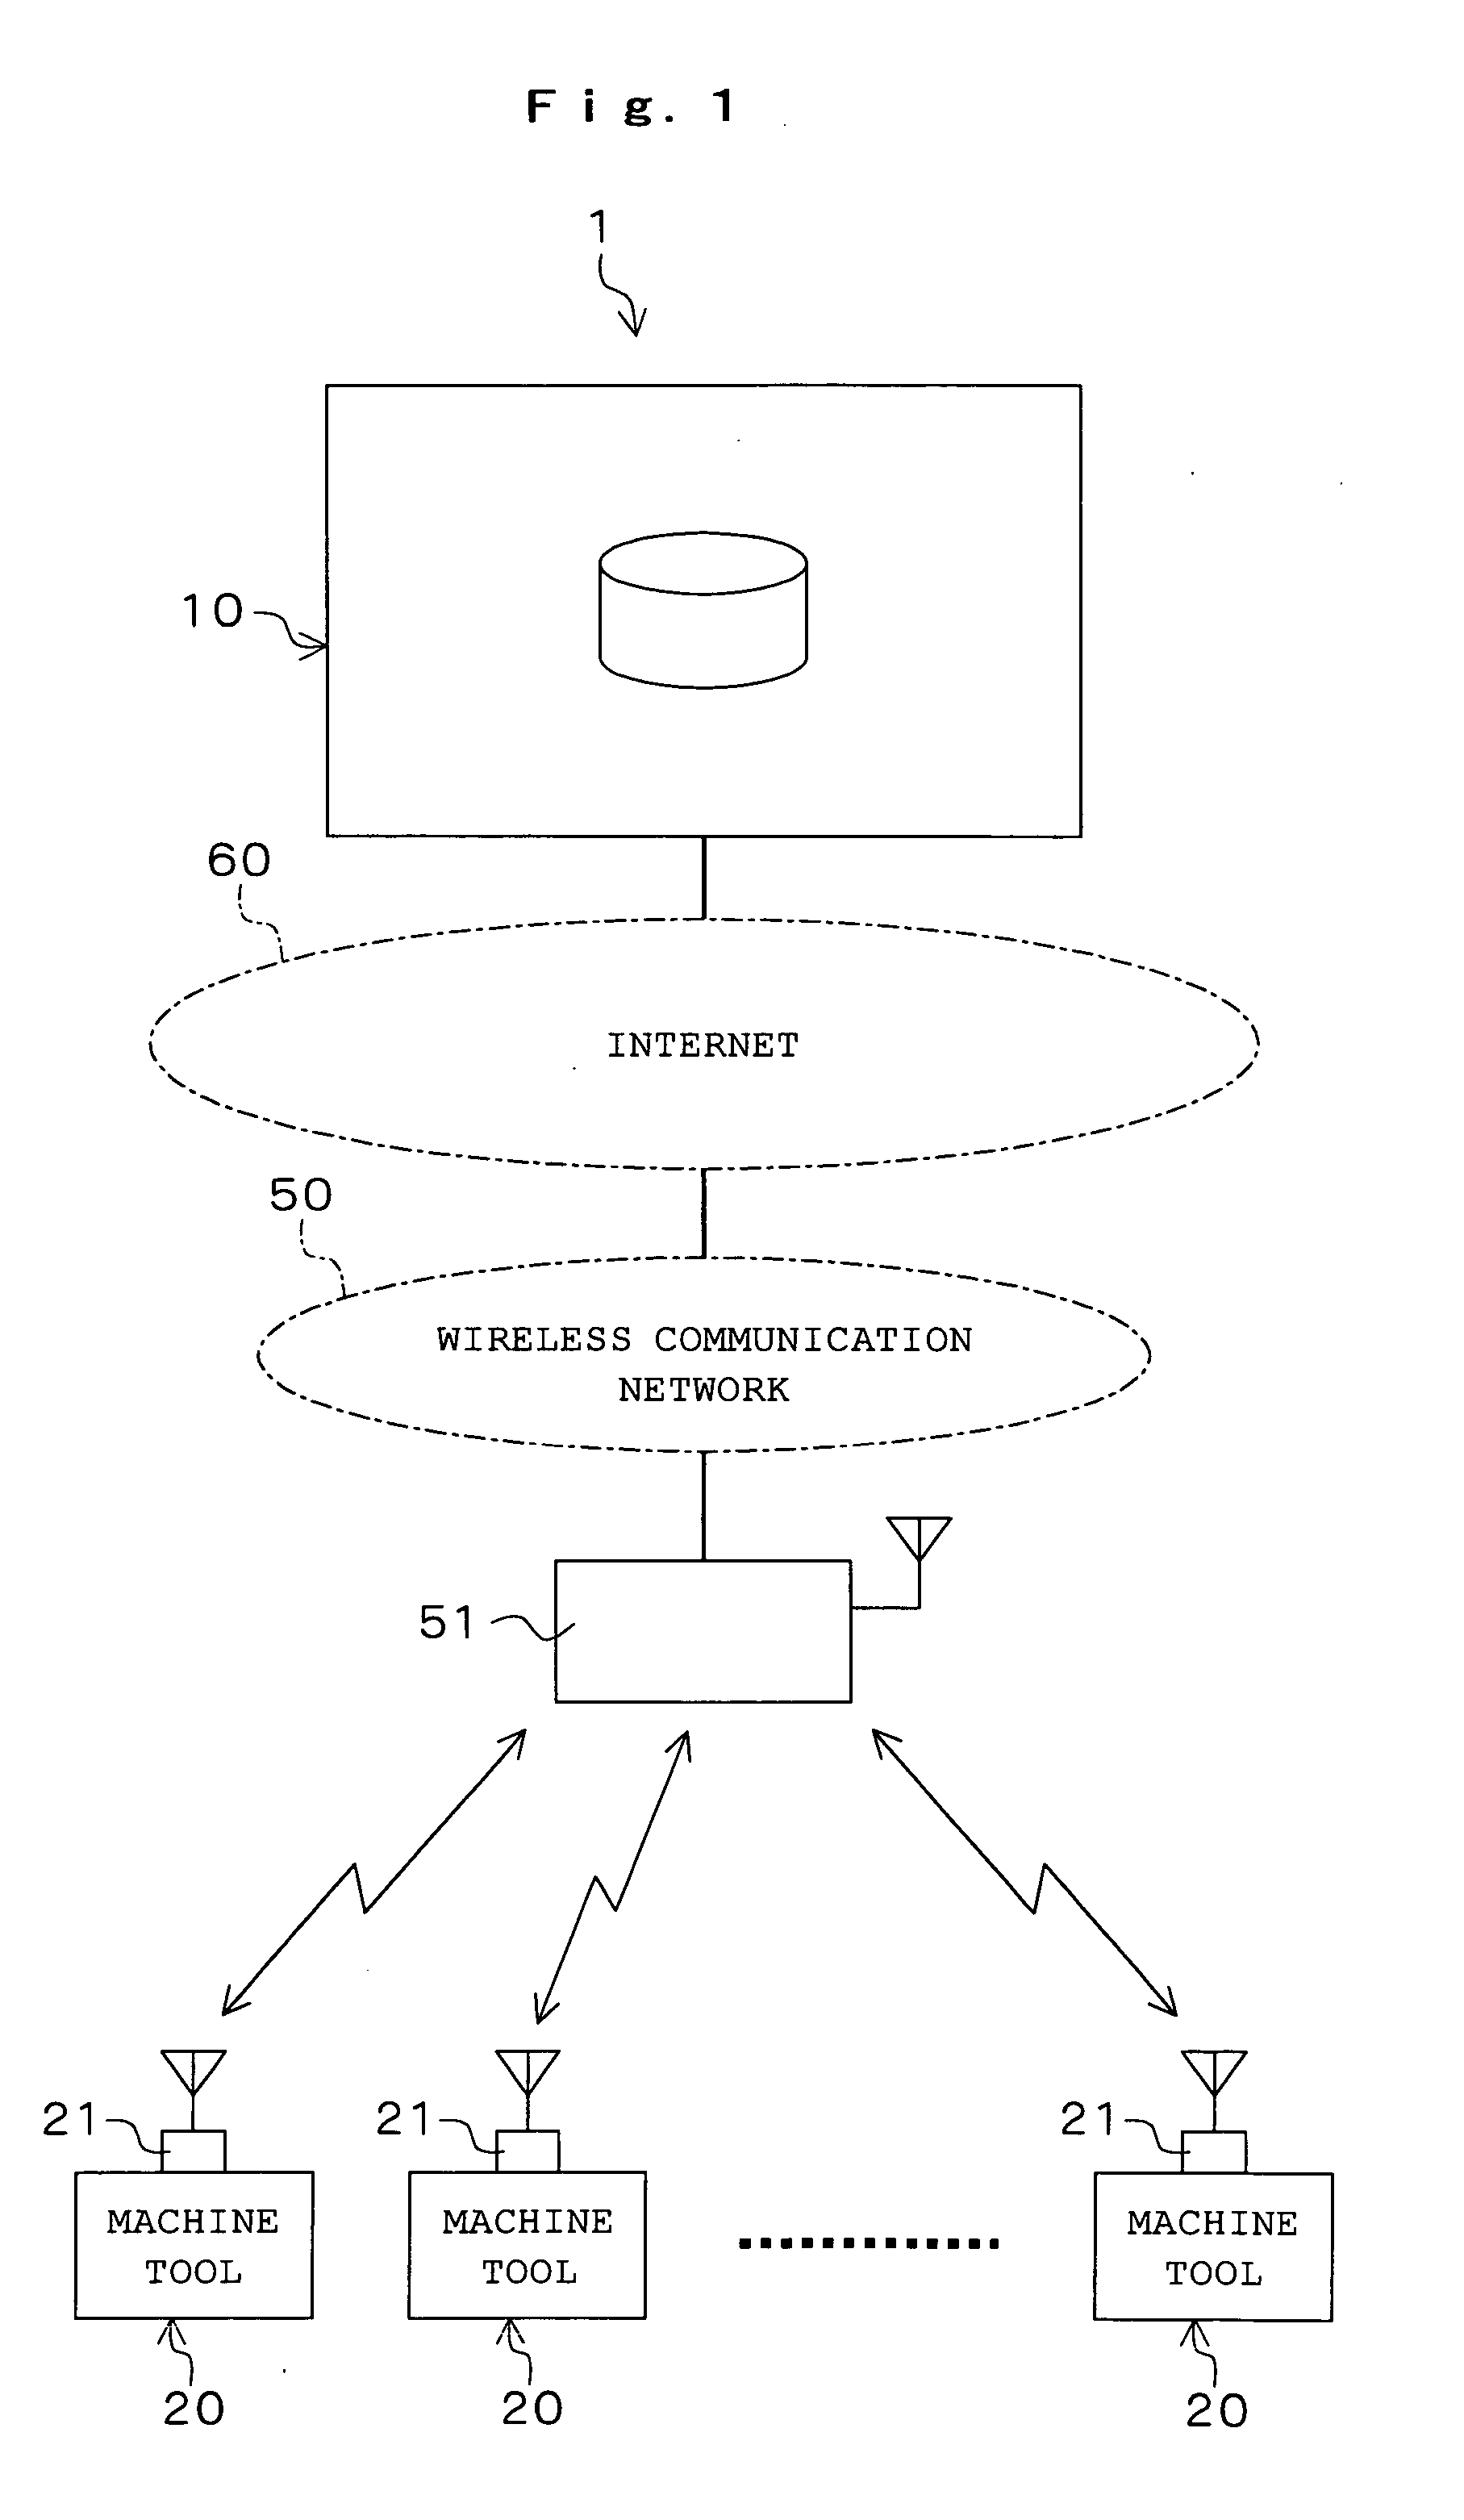 Operating state management system for machine tool